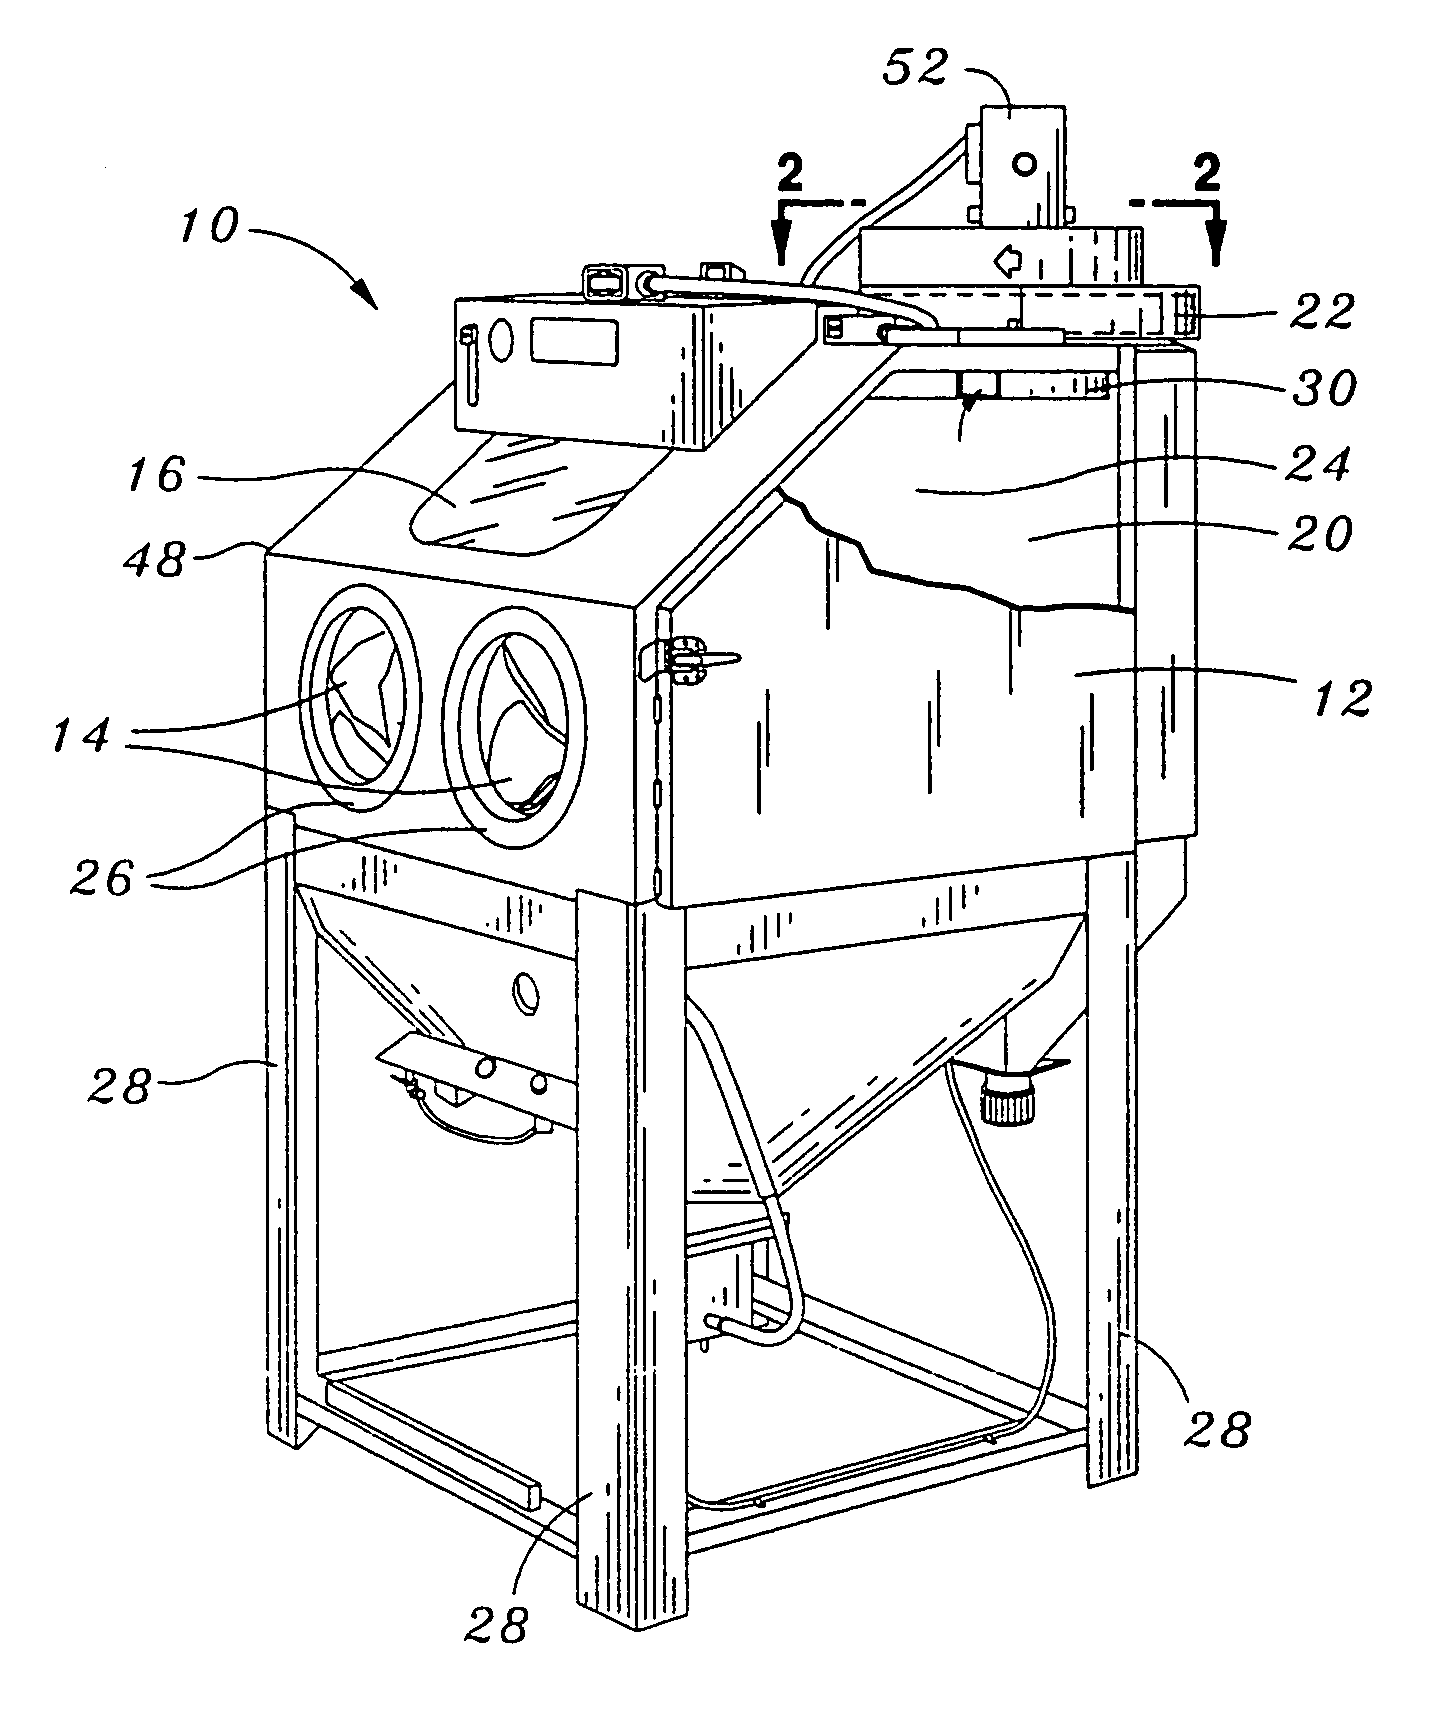 Abrasive and dust separator